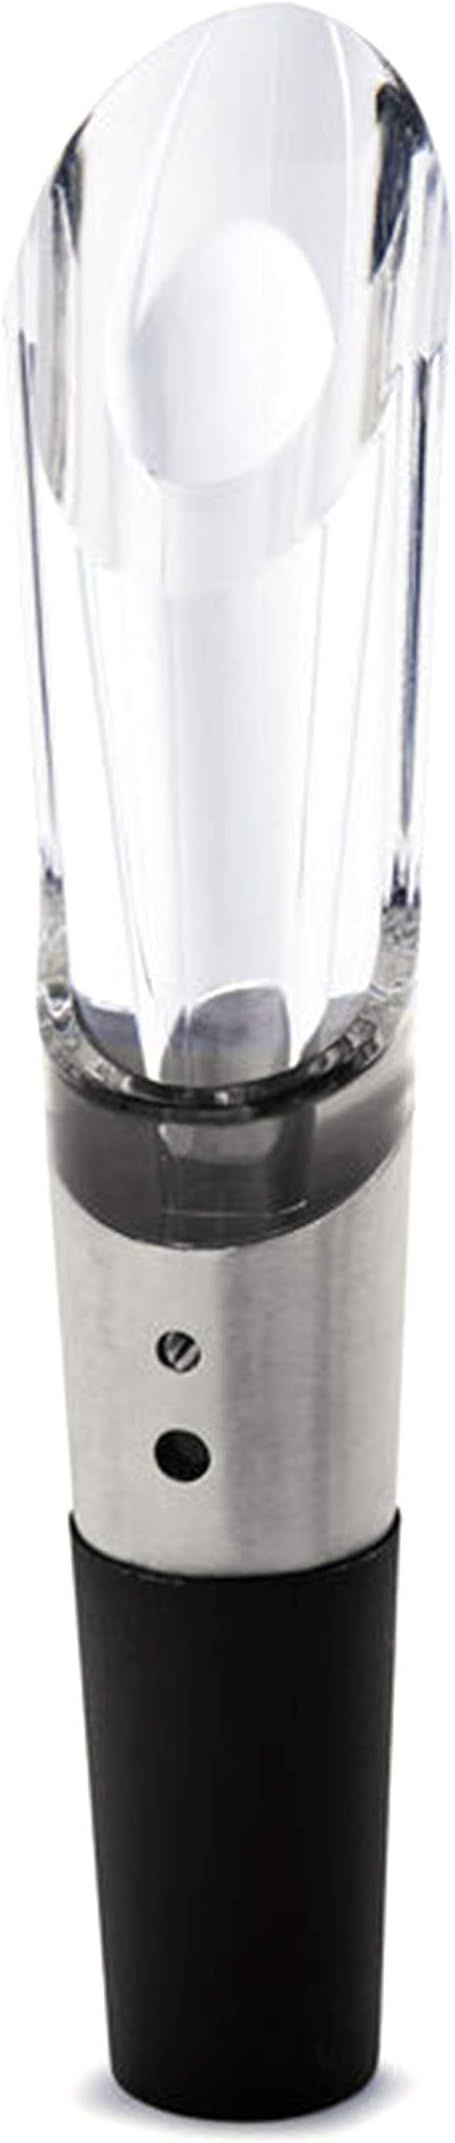 Rabbit W6127 Wine Aerator and Pourer, 1.1 x 1.1 x 5.2 inches, Clear/Stainless Steel | Amazon (US)